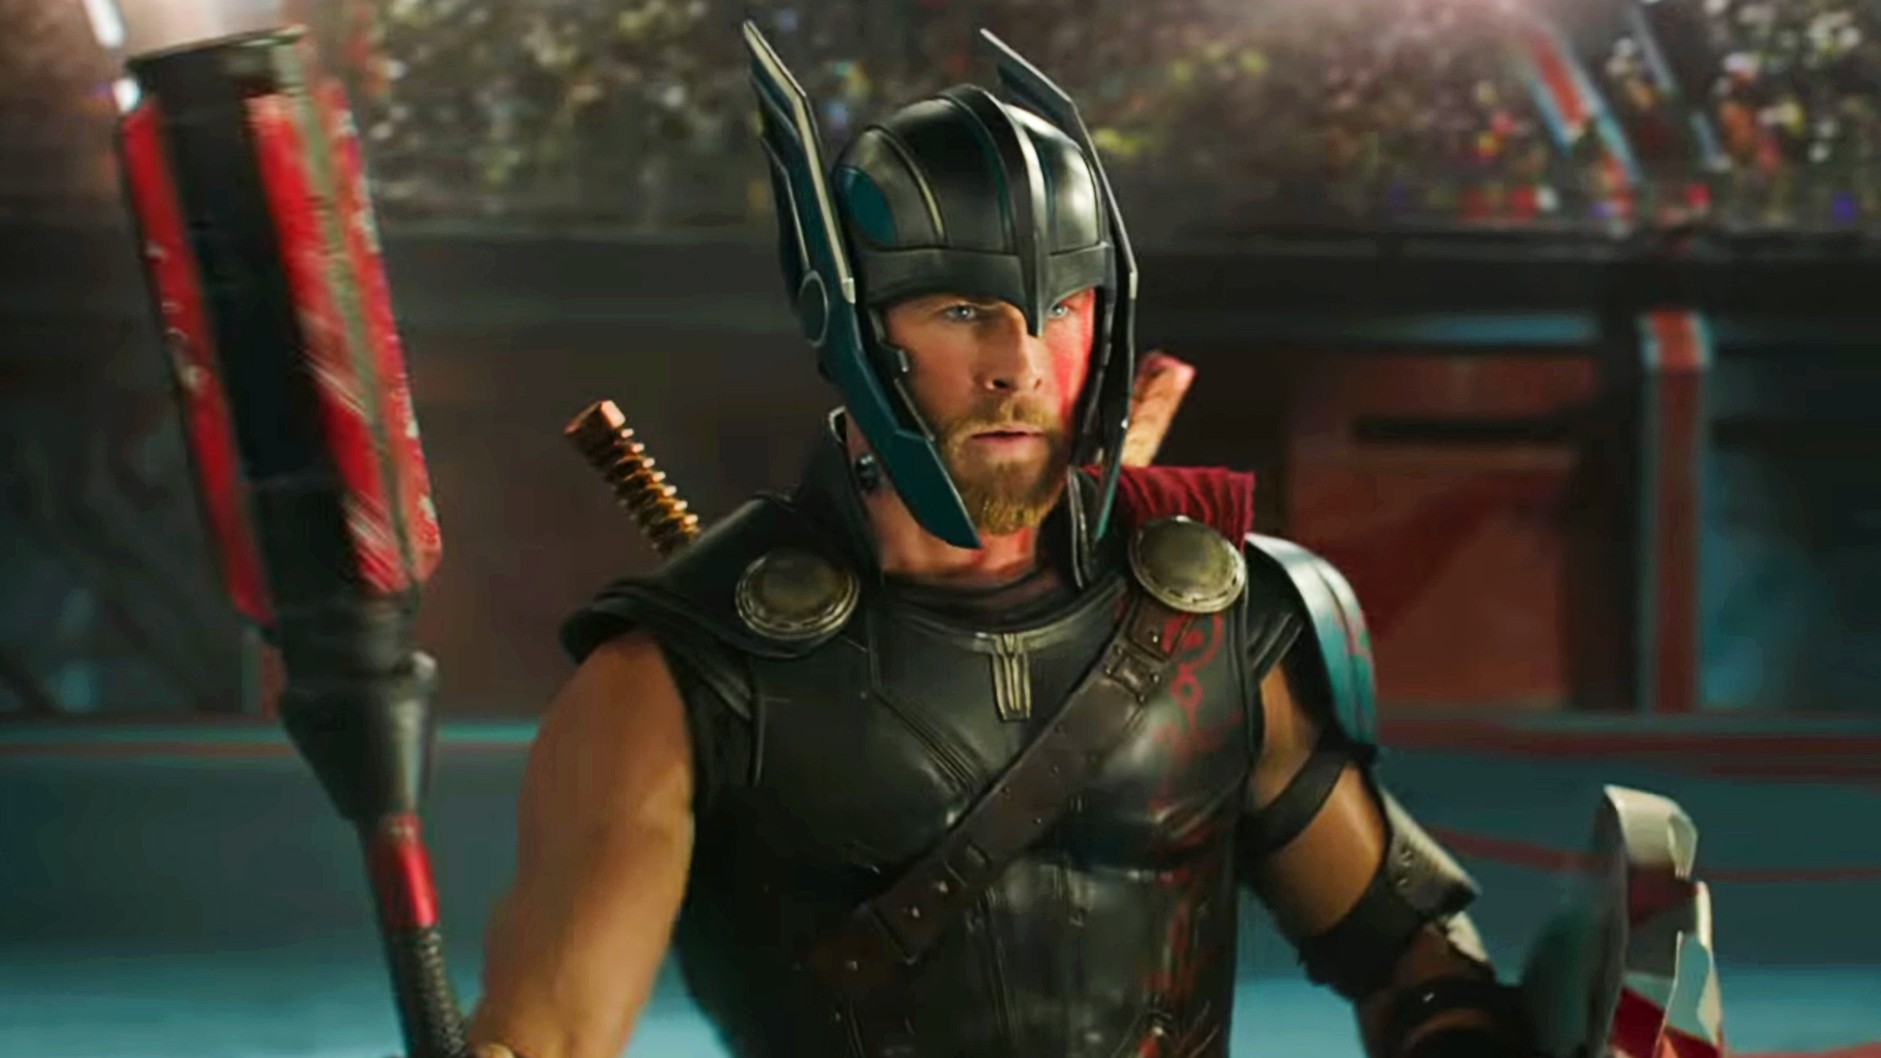 Thor: Ragnarok' Feels Like an Extension of 'Guardians of the